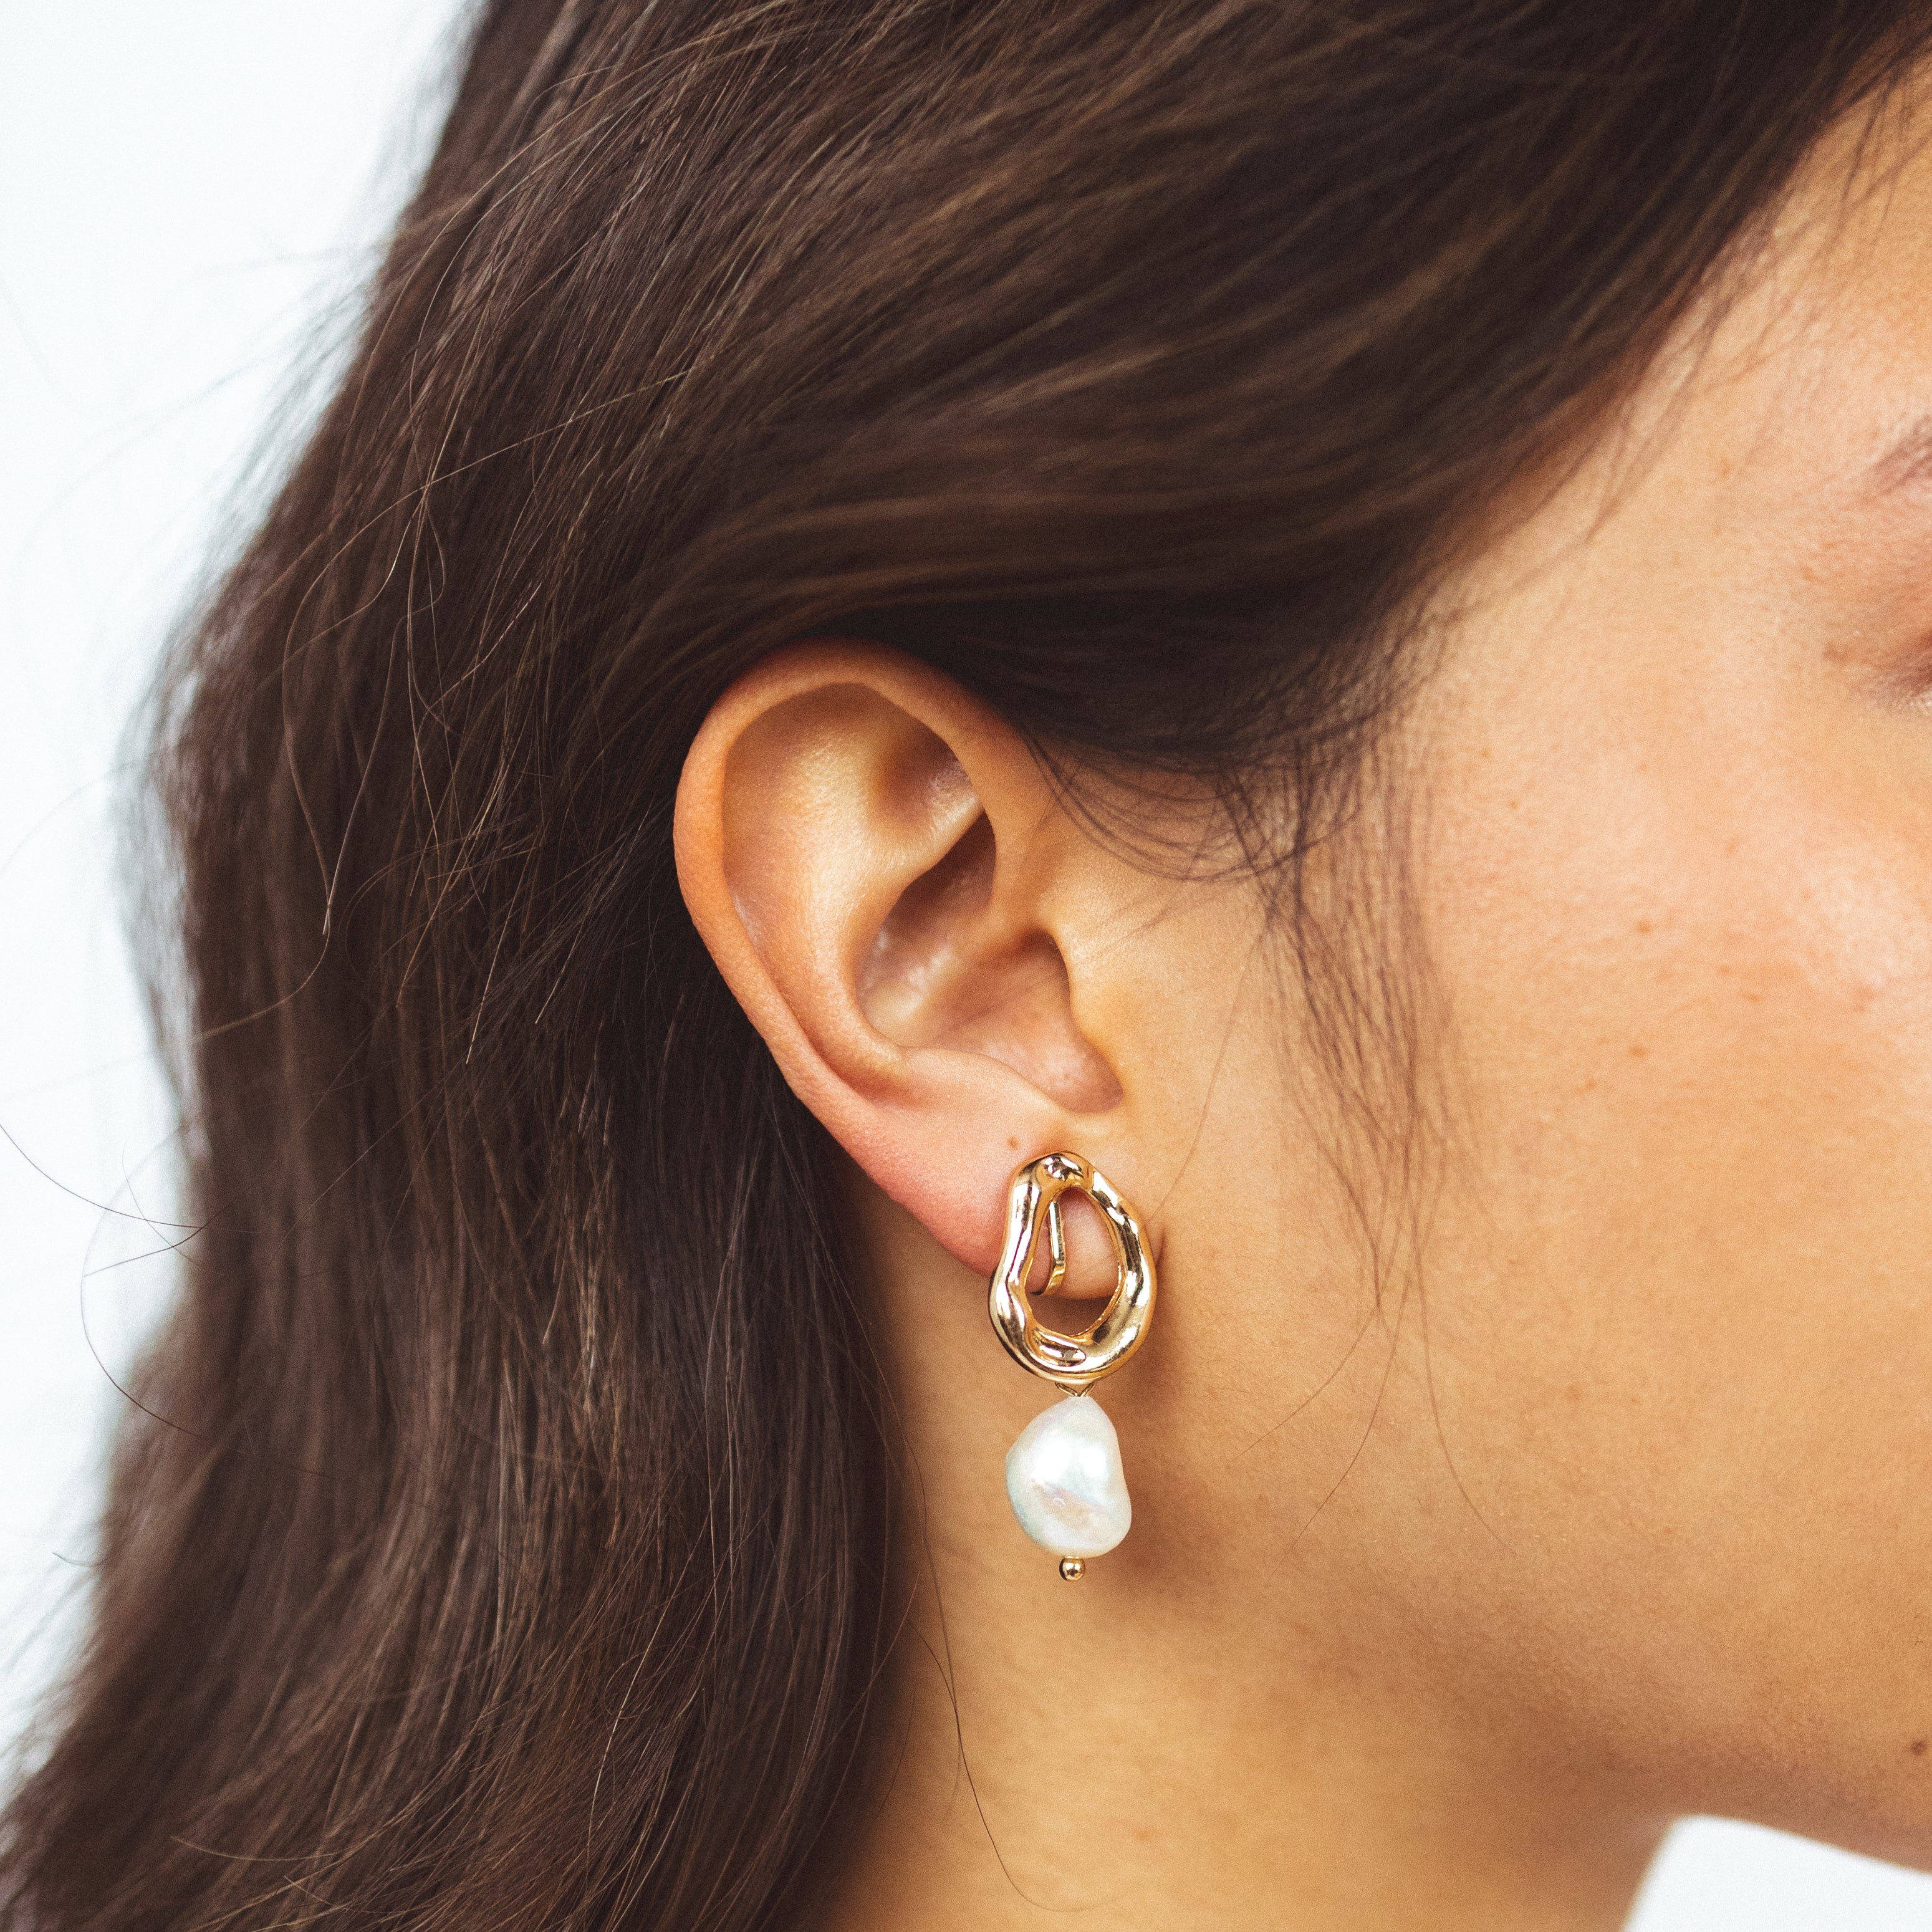 A model wearing the Ella Clip On Earrings. Perfect for sensitive or stretched ears, they provide a 24-hour hold and adjustable fit for unmatched comfort. Effortlessly add a touch of elegance to your look.